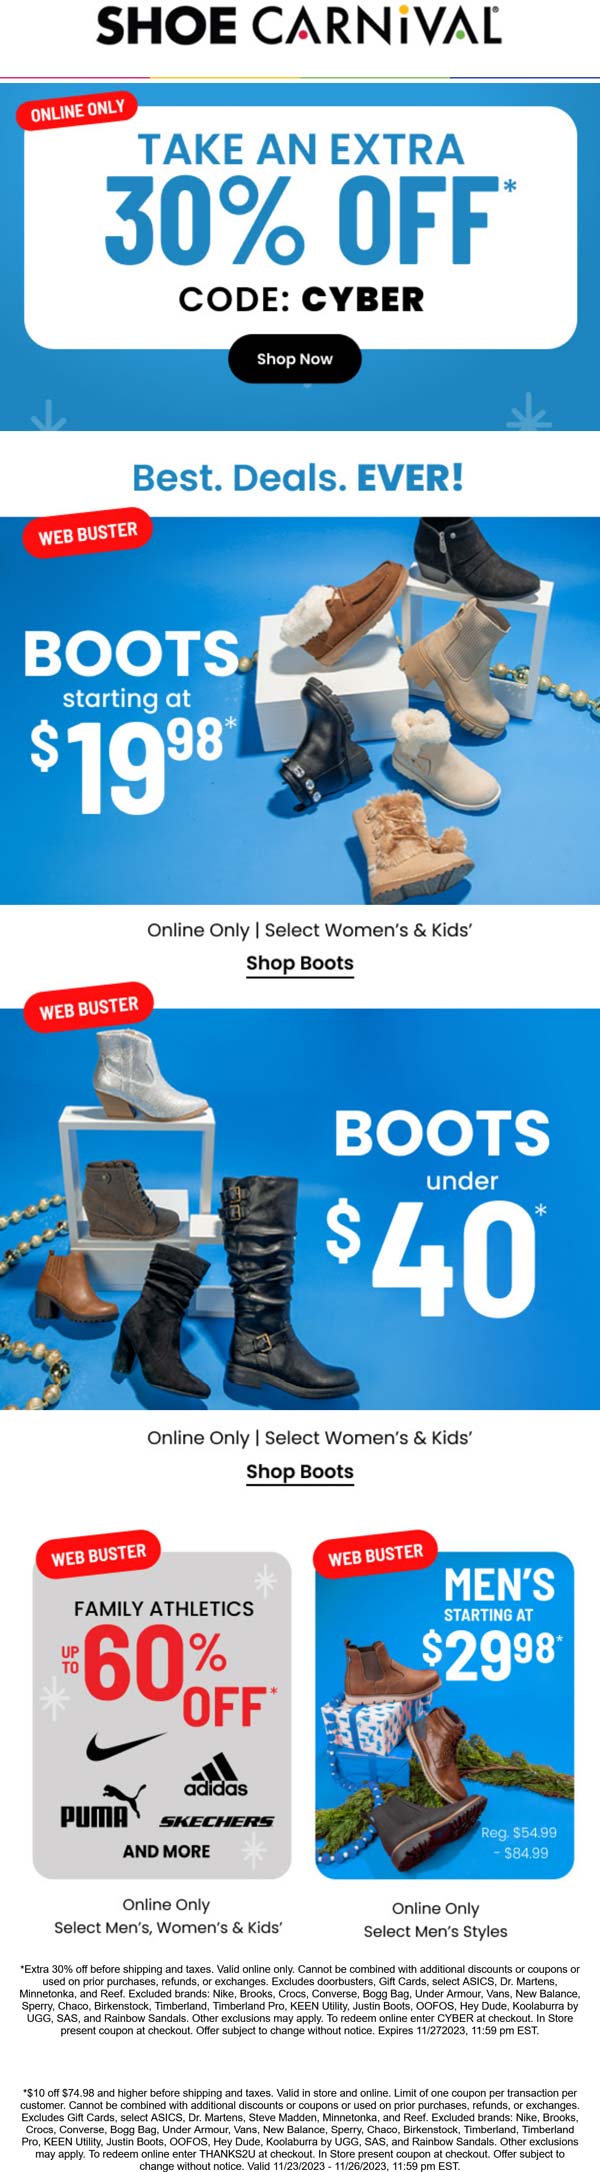 Shoe Carnival stores Coupon  30% off at Shoe Carnival via promo code CYBER #shoecarnival 